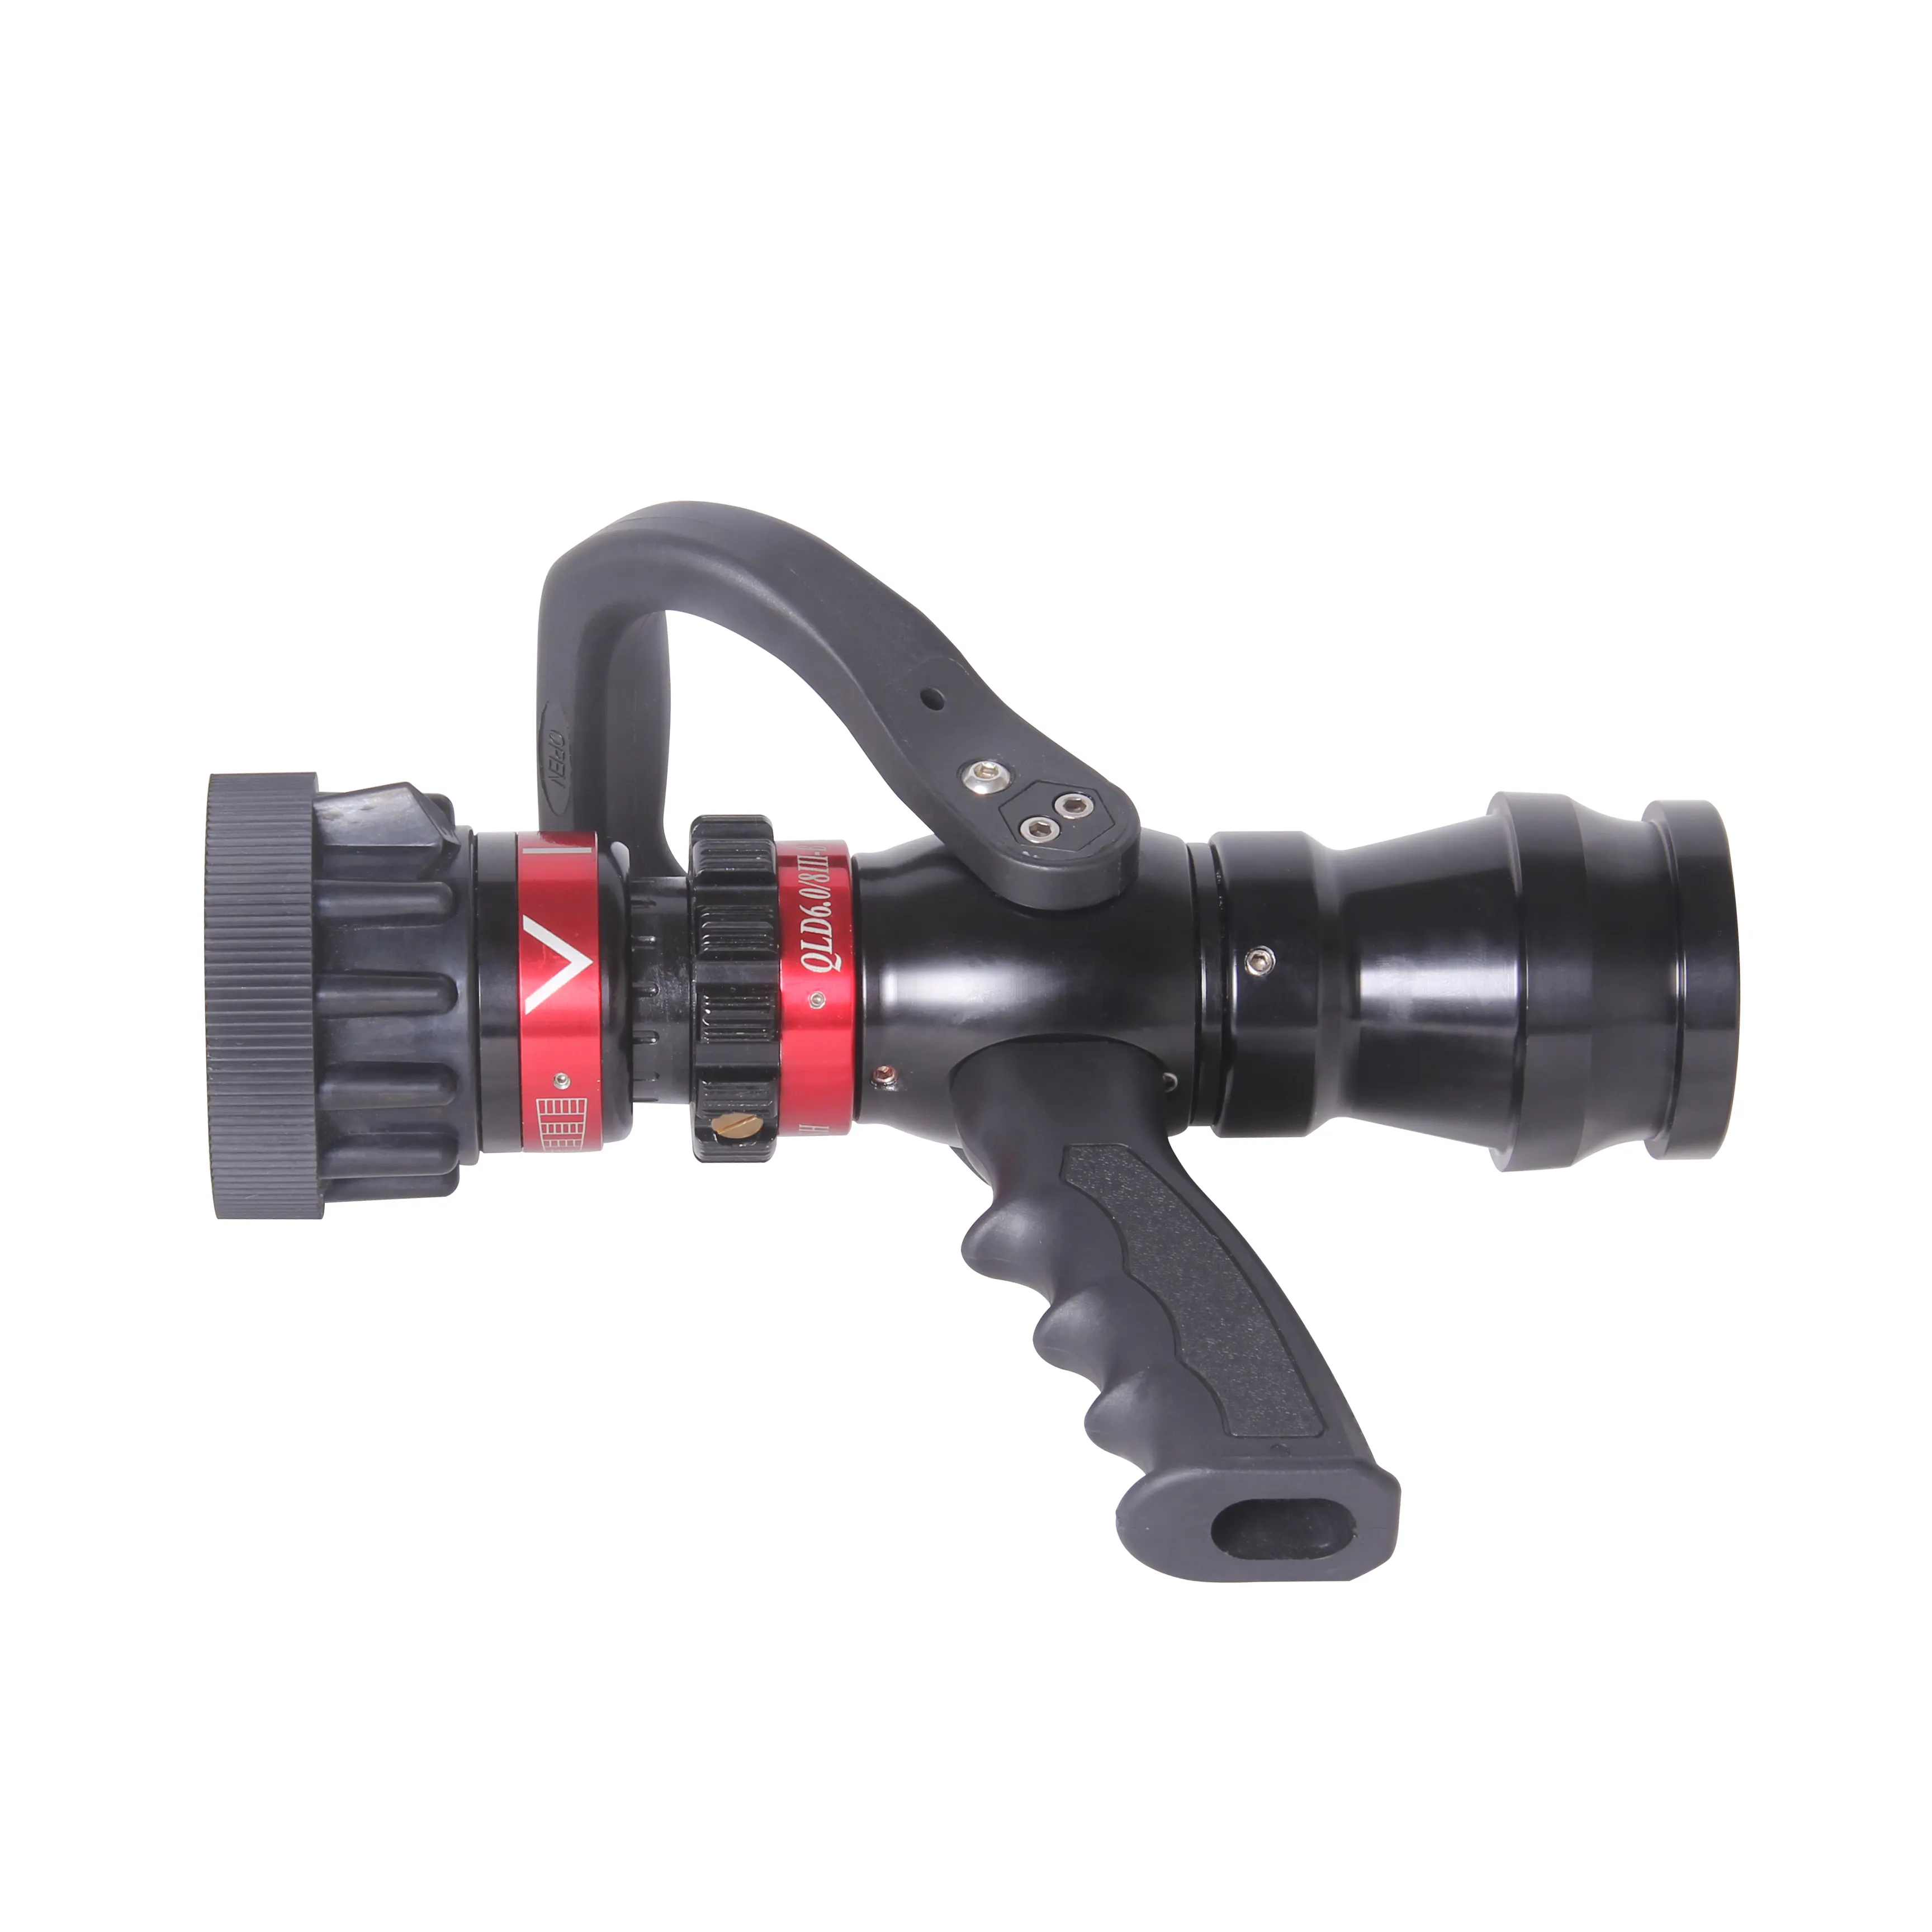 Super quality Huaqiu selectable flow fire fighting nozzle pistol grip fire water hose nozzle